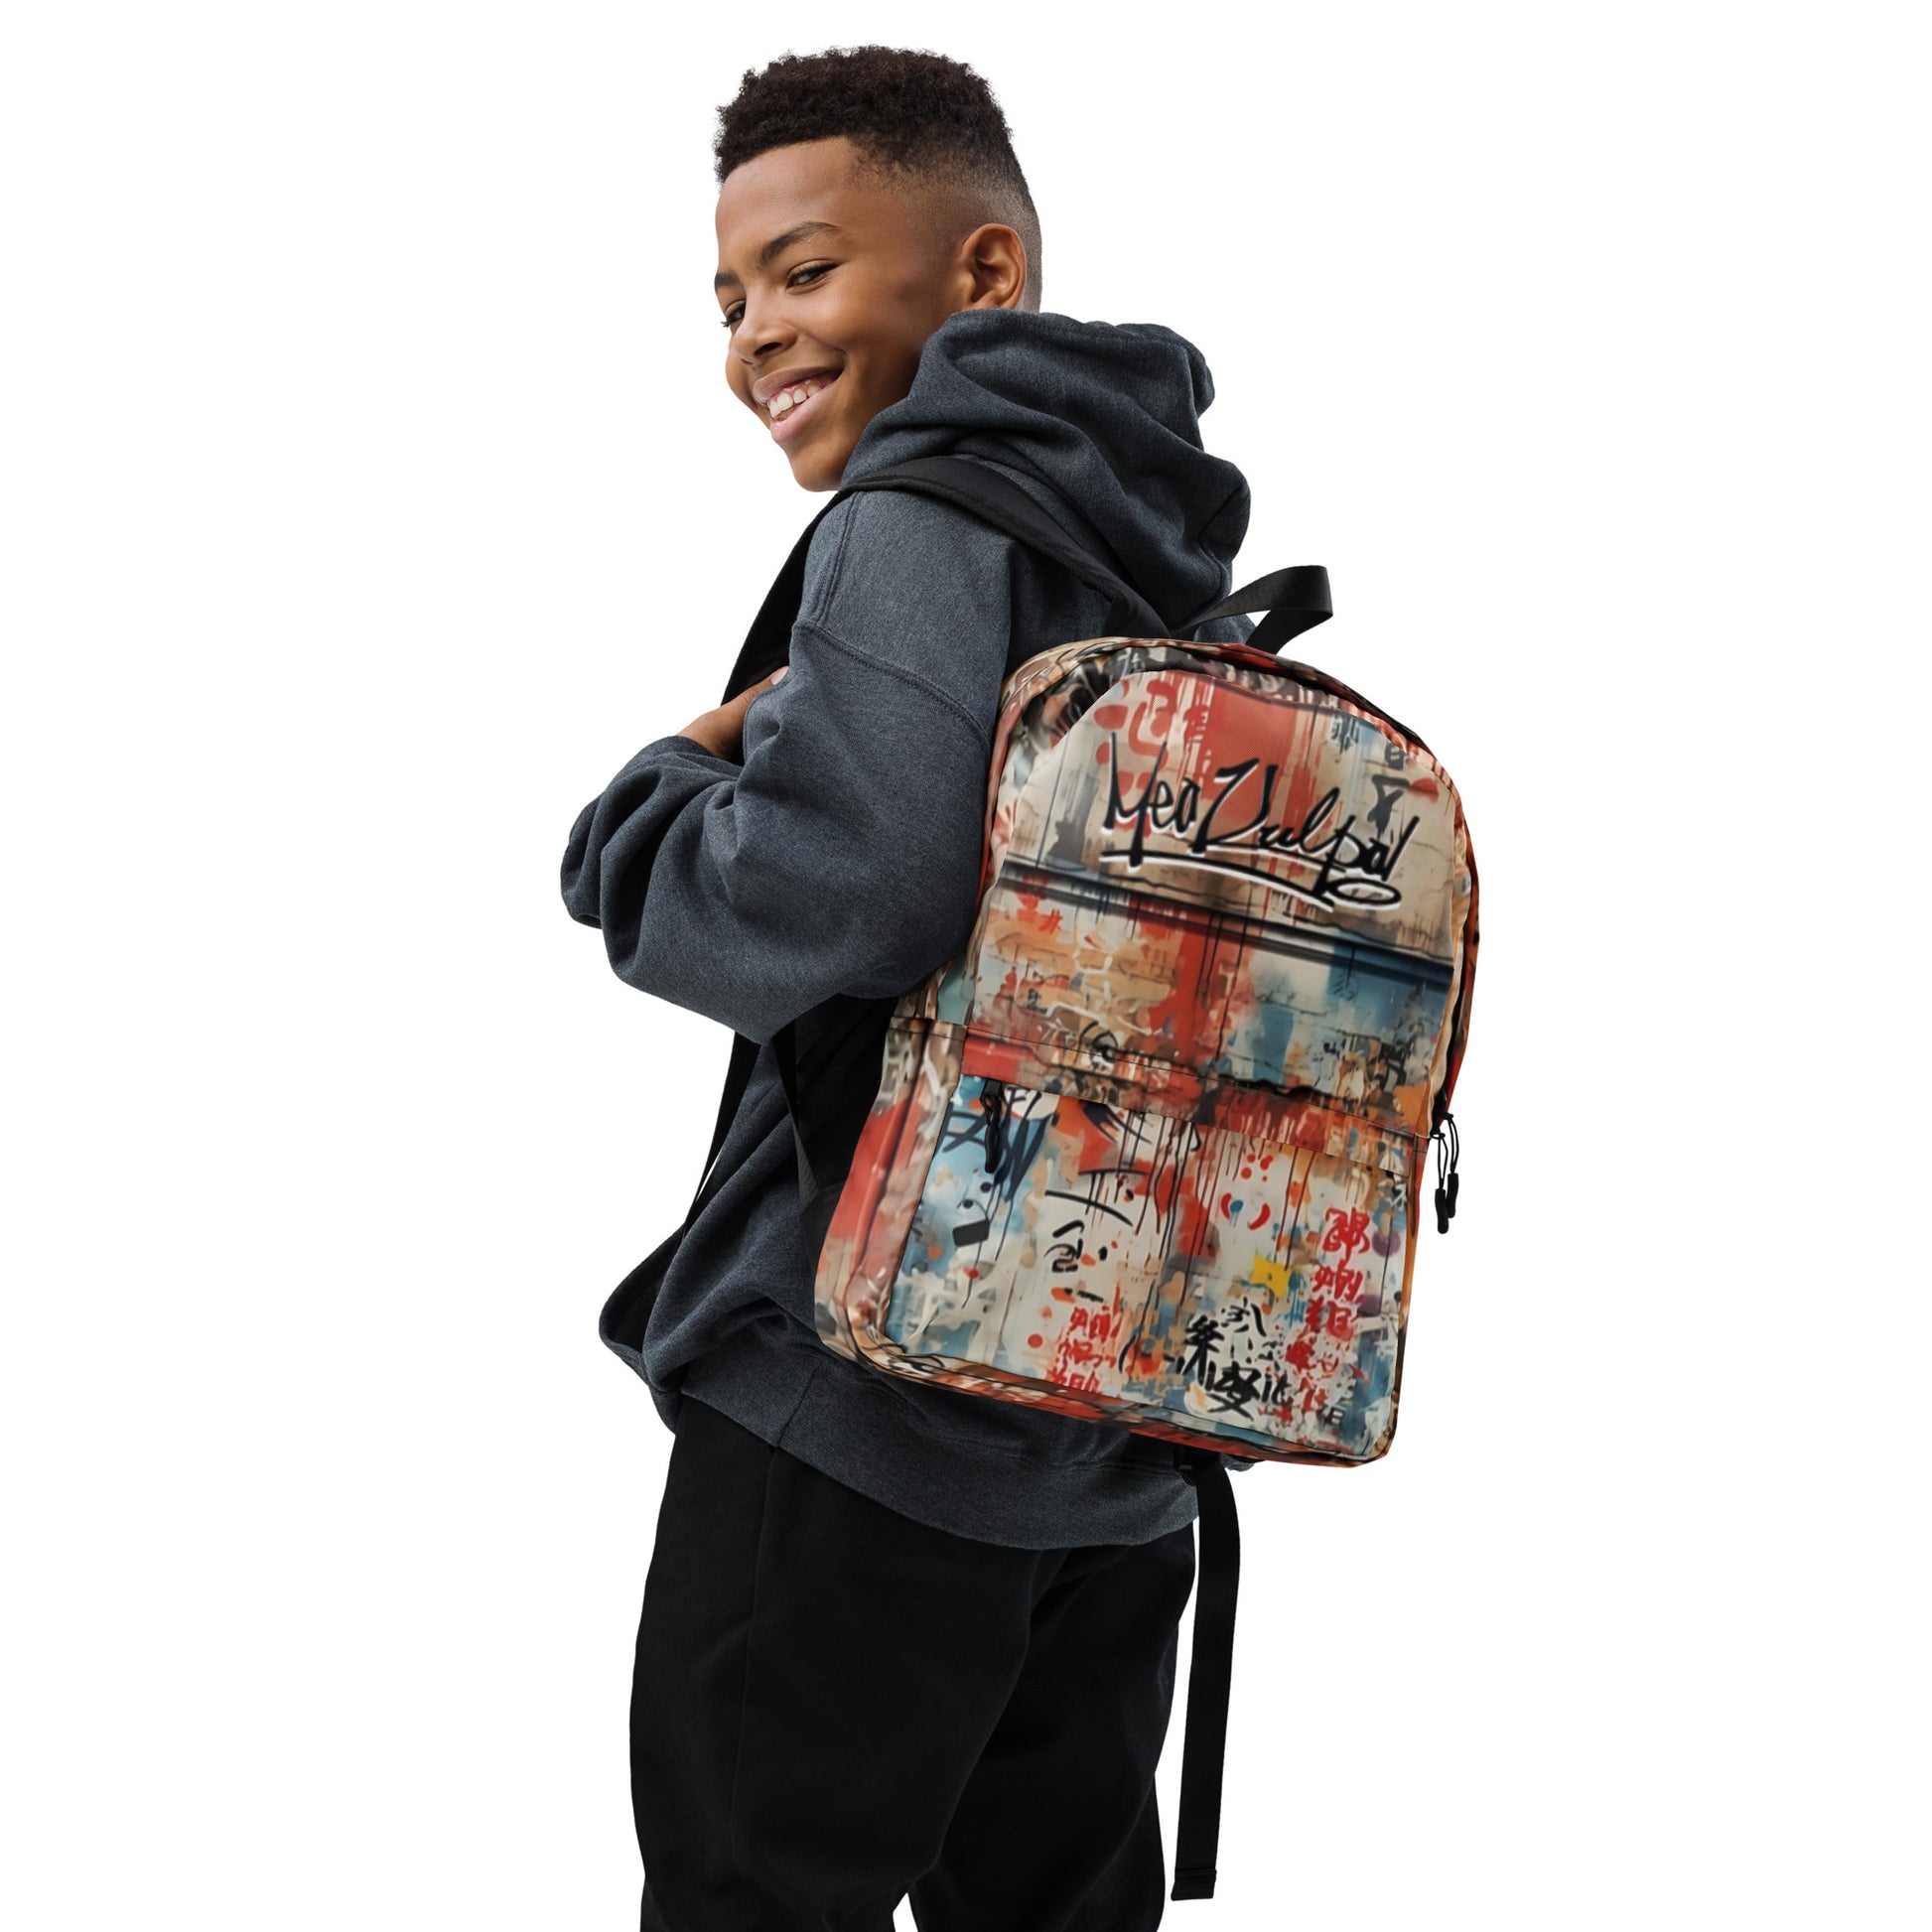 In this snapshot, a teenager effortlessly rocks the MeaKulpa Medium Size Backpack, embodying the epitome of street-style cool. The graffiti design mirrors the vibrant energy of youth, while the backpack's practicality caters to the dynamic needs of a teenager on the move. It's not just a bag; it's a statement of individuality and functionality, perfectly suited for the teen navigating the rhythm of urban life.